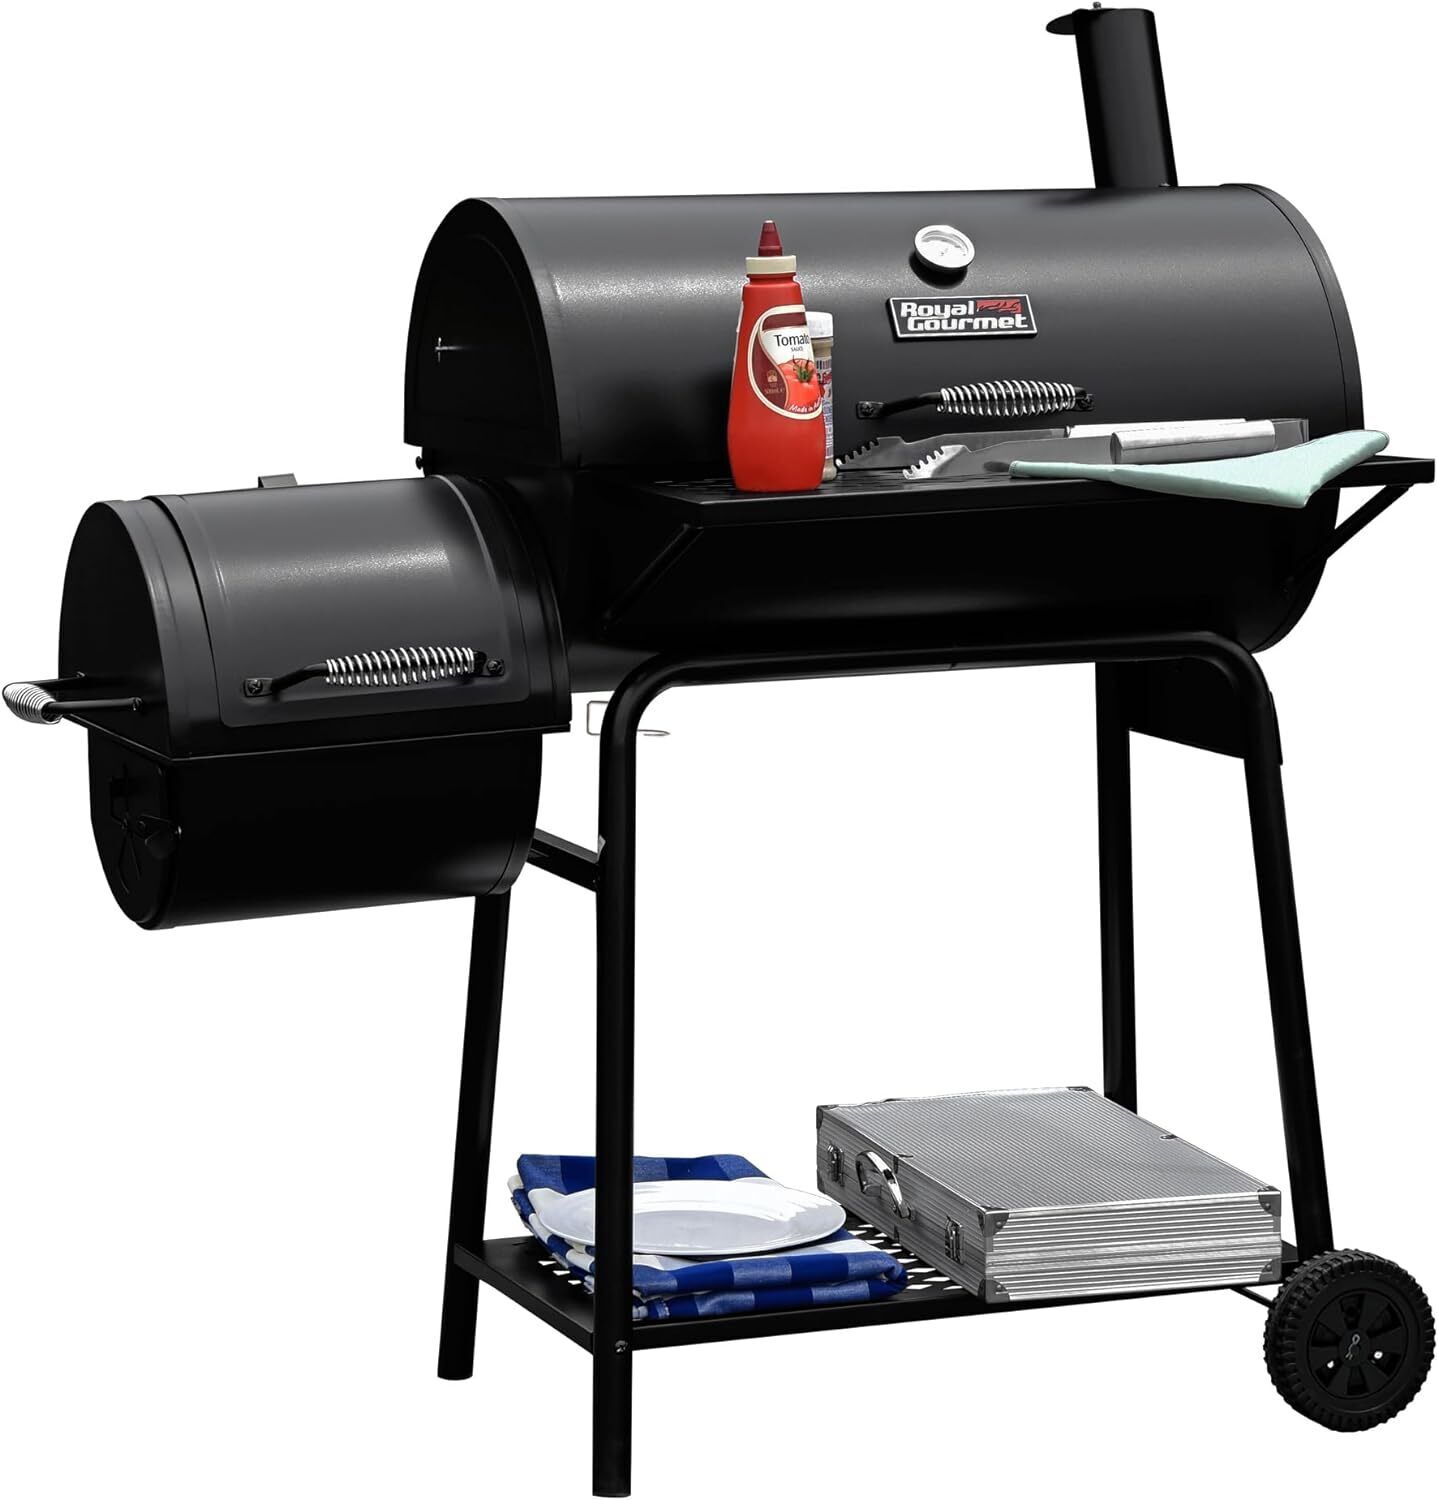 CC1830F Grill with Offset Smoker, Barrel Charcoal BBQ Outdoor Backyard Cooking